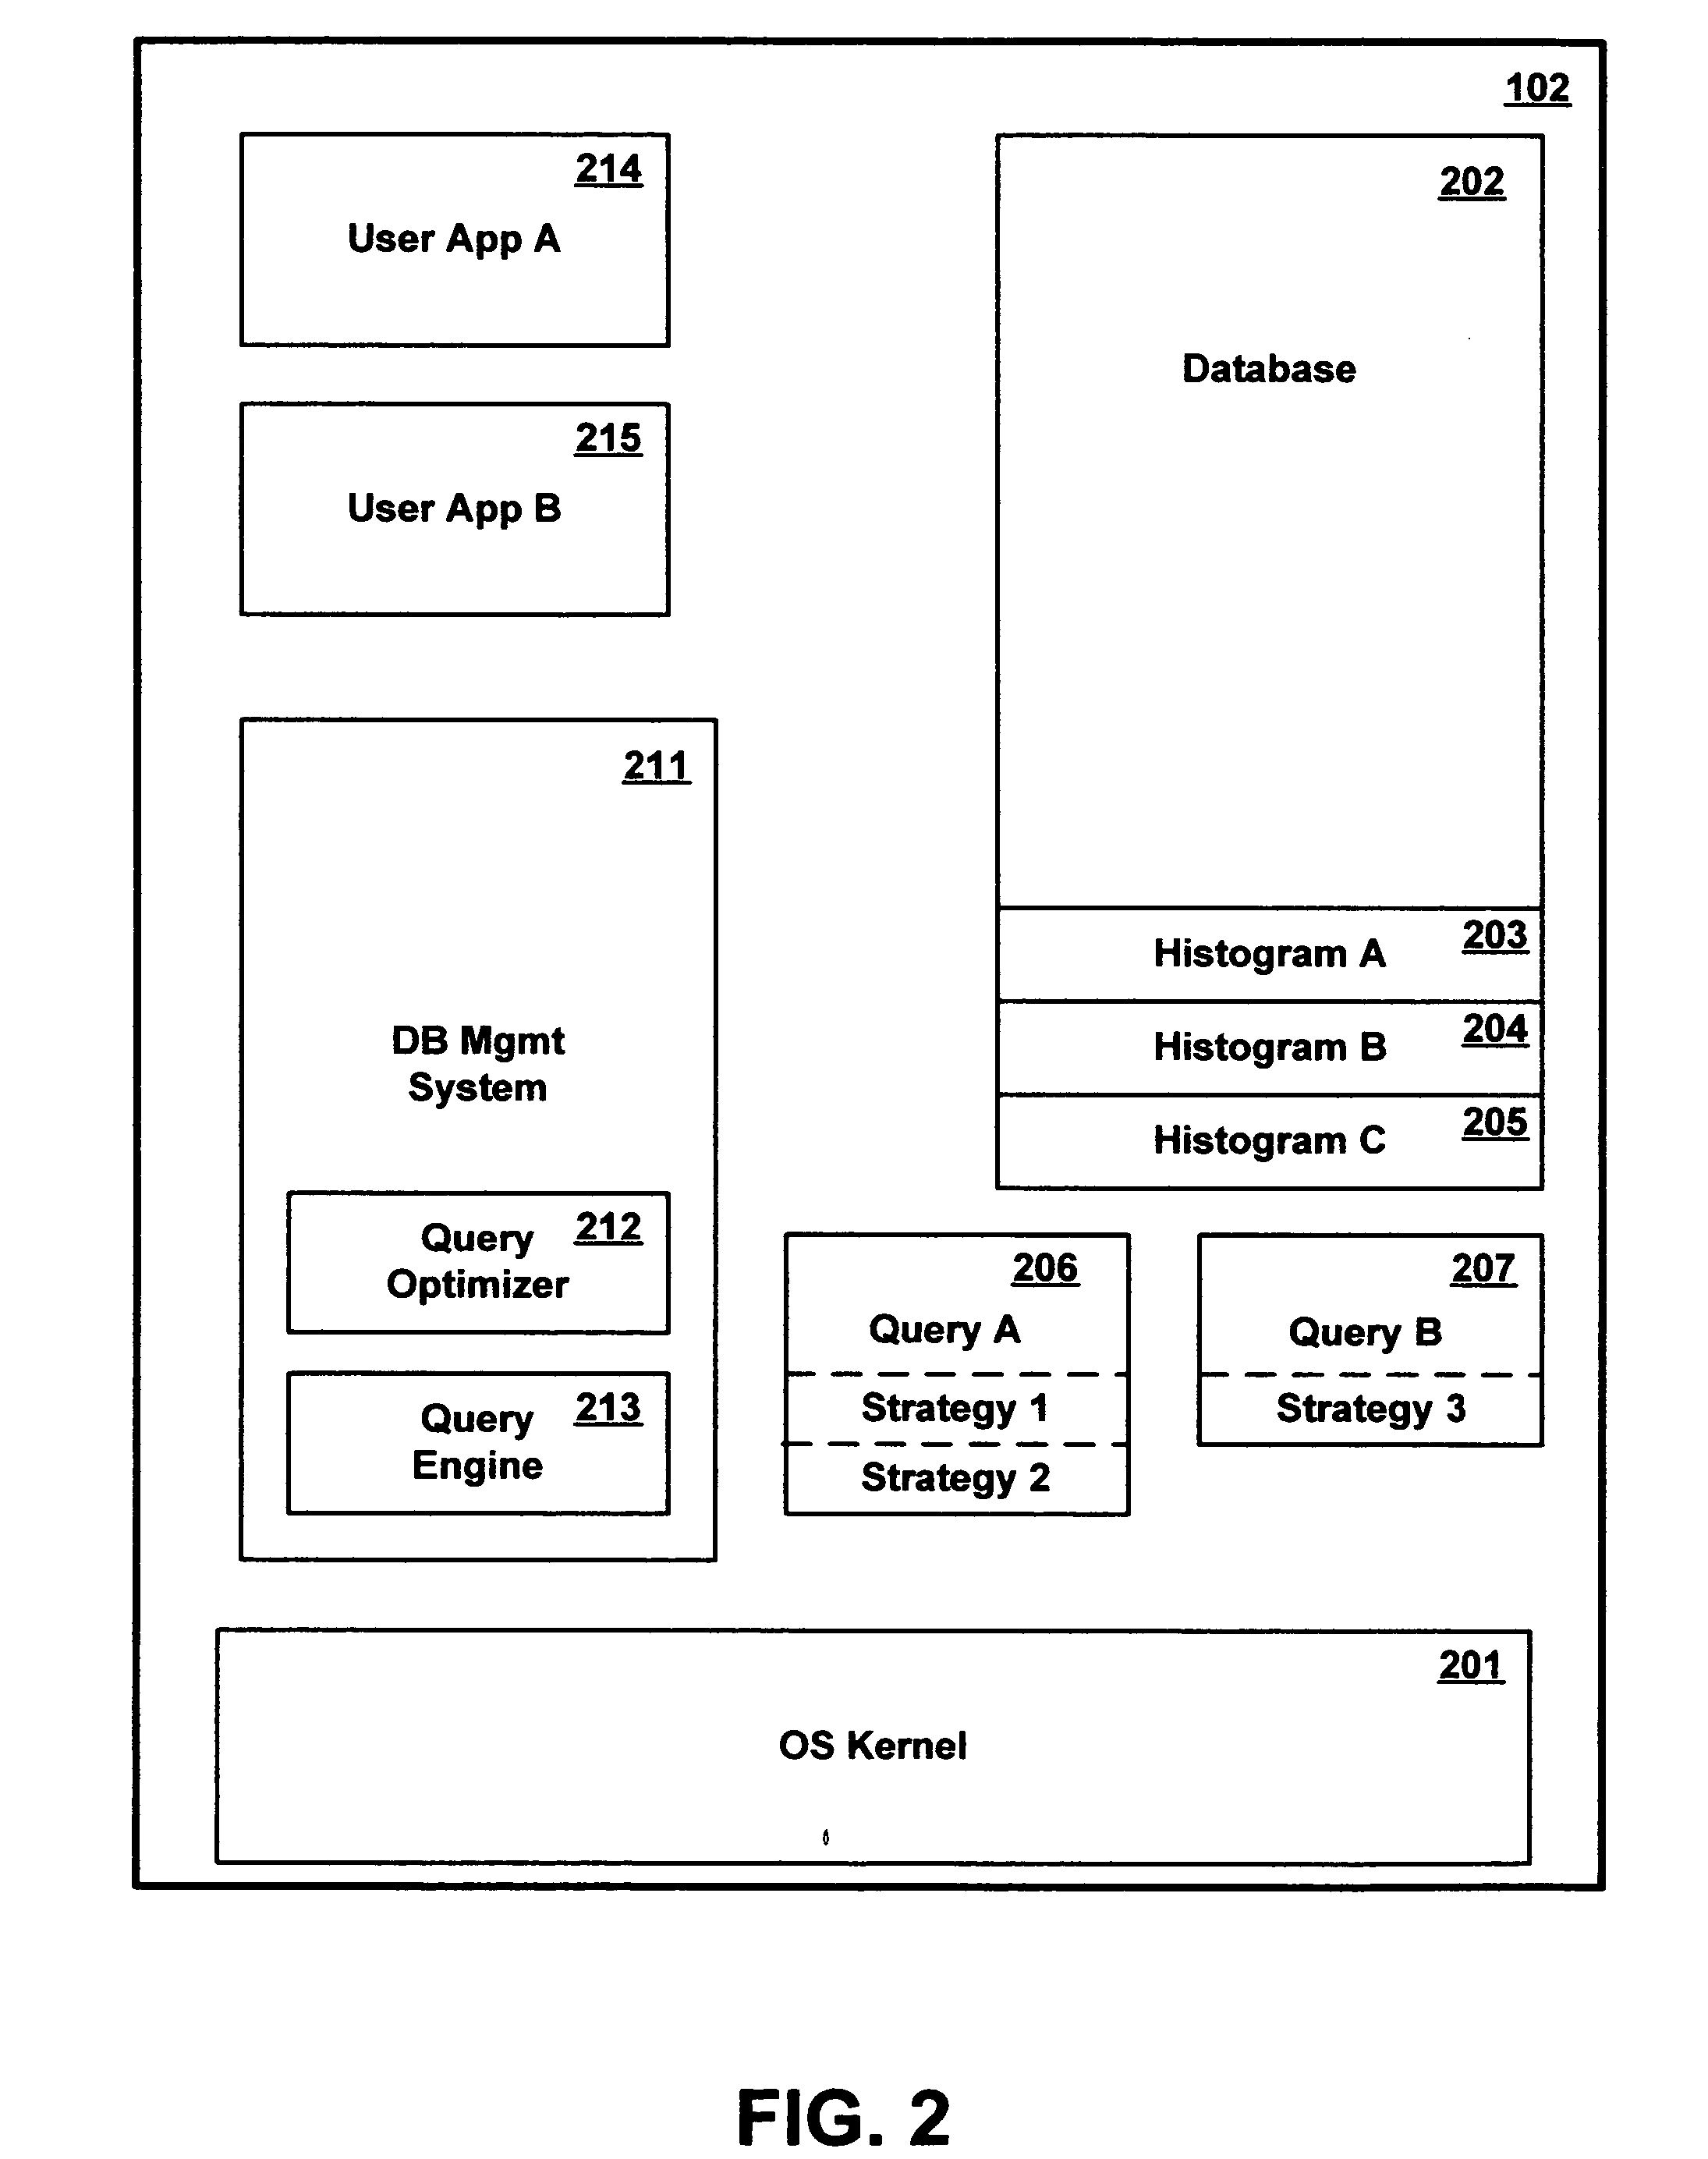 Method and apparatus for predicting relative selectivity of database query conditions using respective cardinalities associated with different subsets of database records